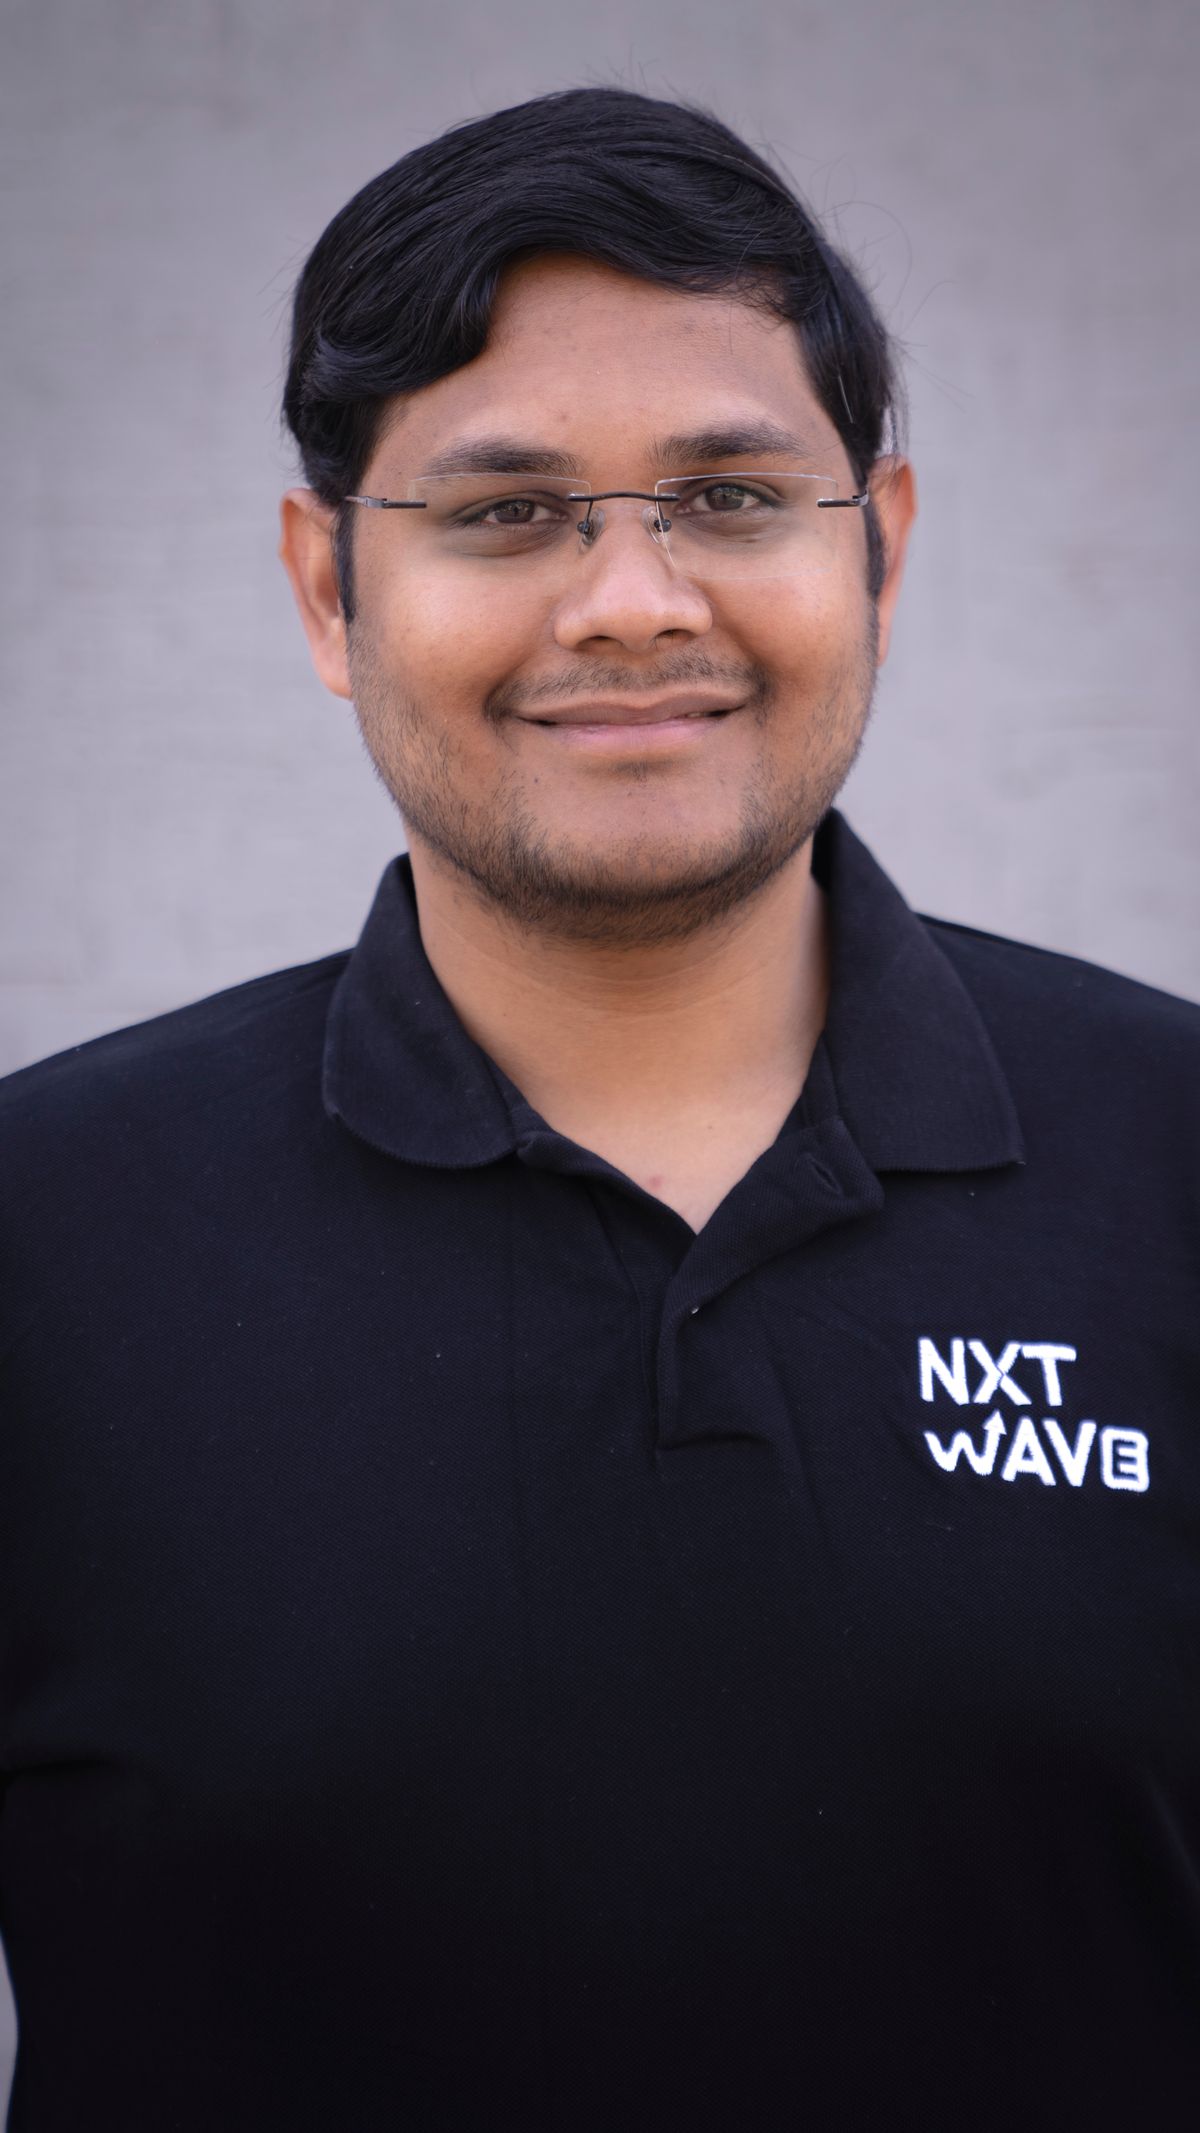 NxtWave empowers students from 2500+ colleges across India with Ethical Hacking Workshop